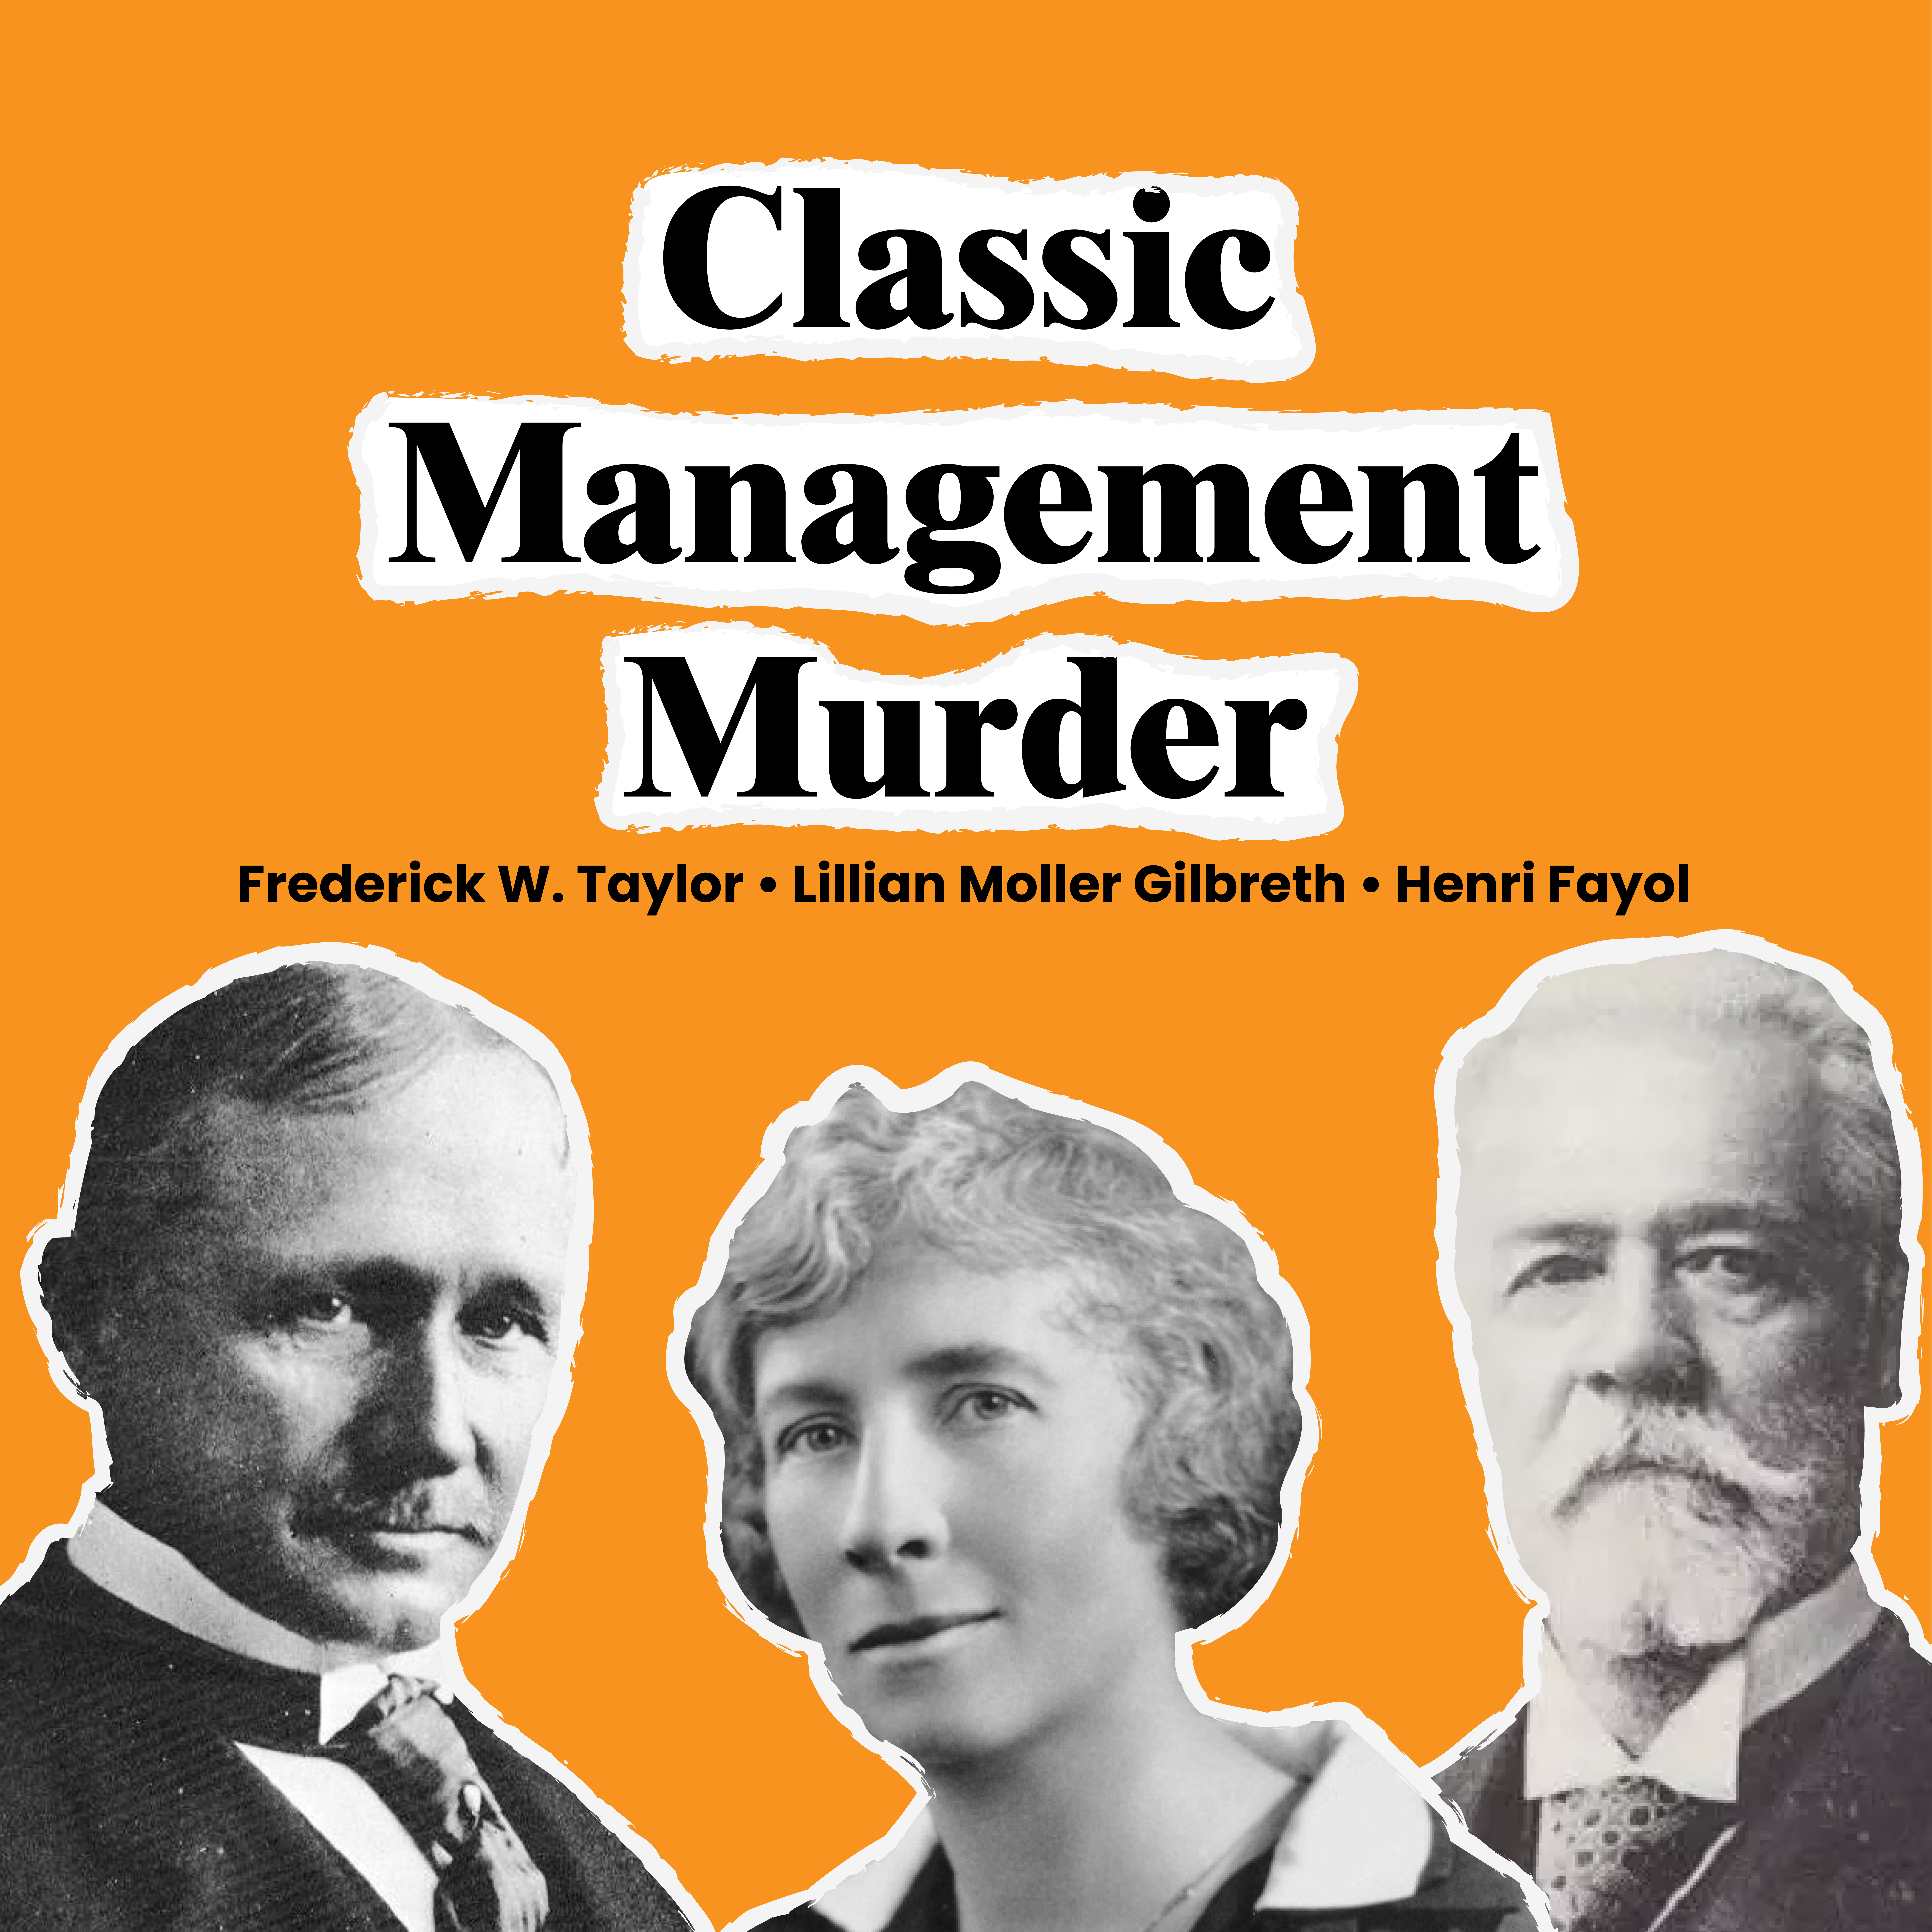 The Perfect Harmony between Ears – Podcasts in Higher Education: Introducing the Classical Management Murder Podcast Series